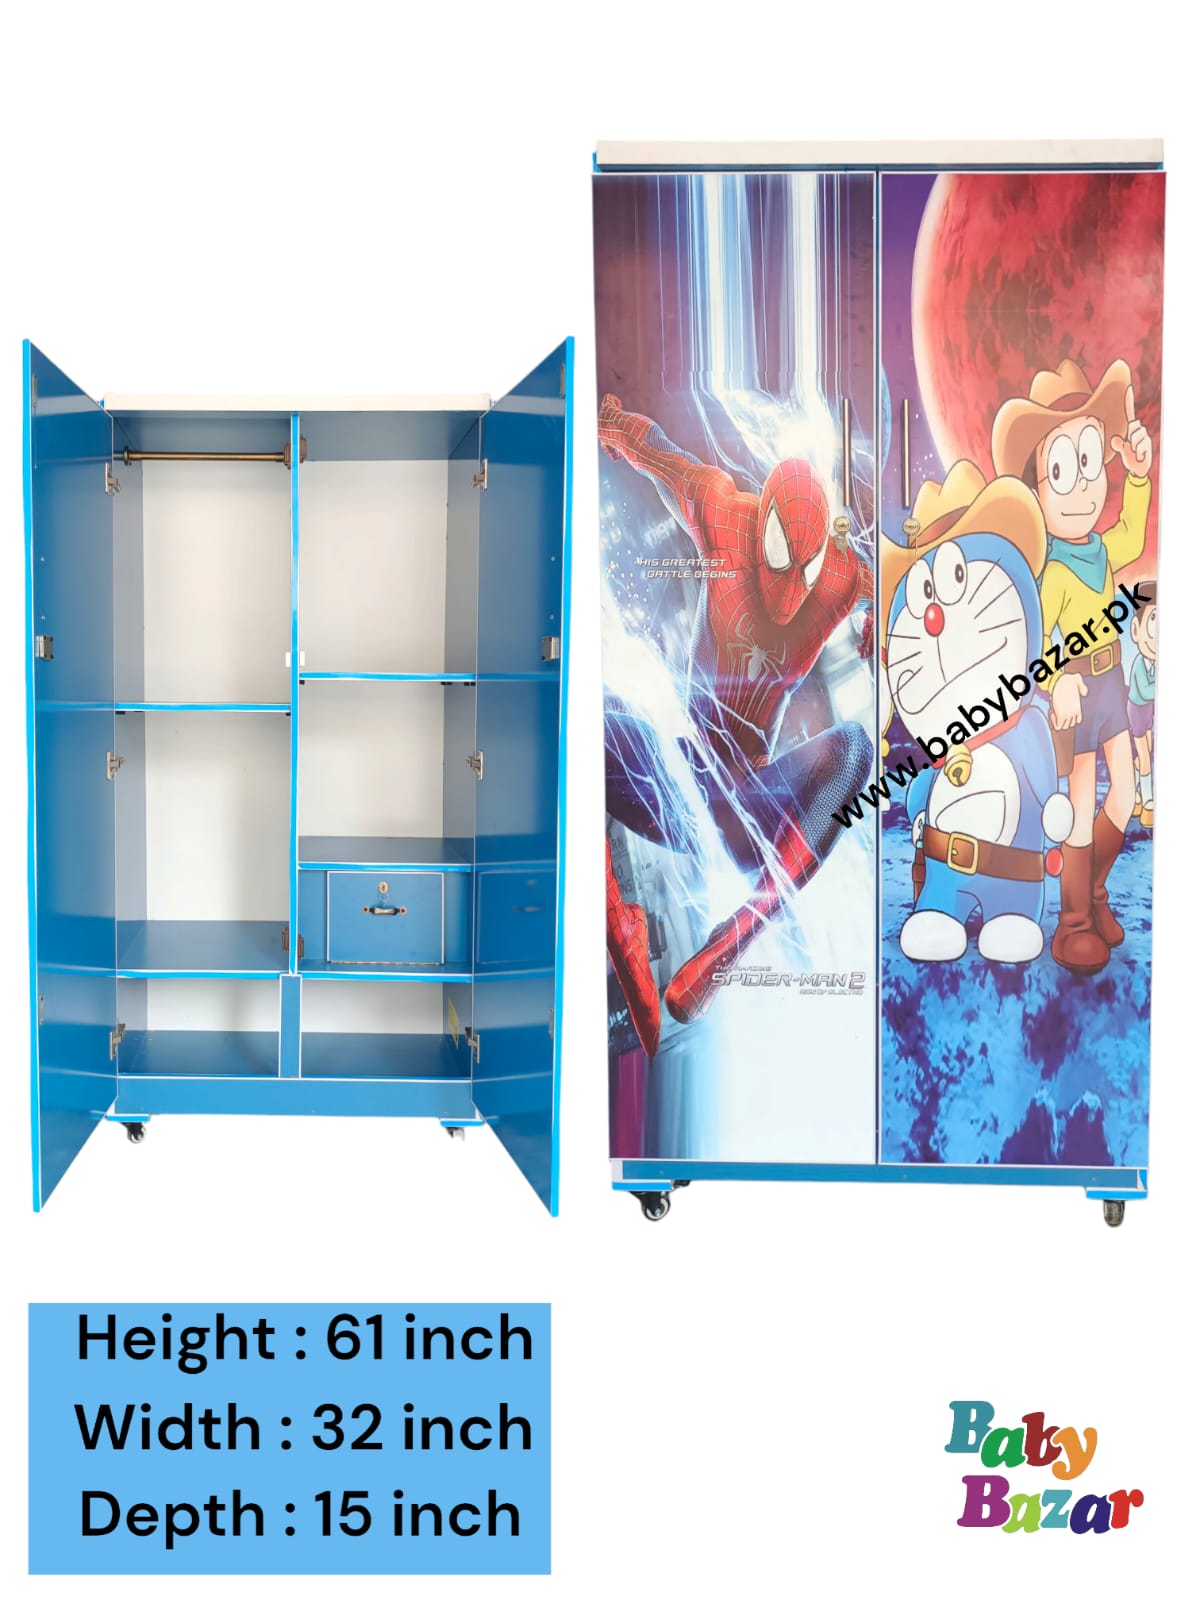 Stylish 5x3ft Wooden Baby Cupboard: Large hanging & storage In Doremon and Spider Man Design